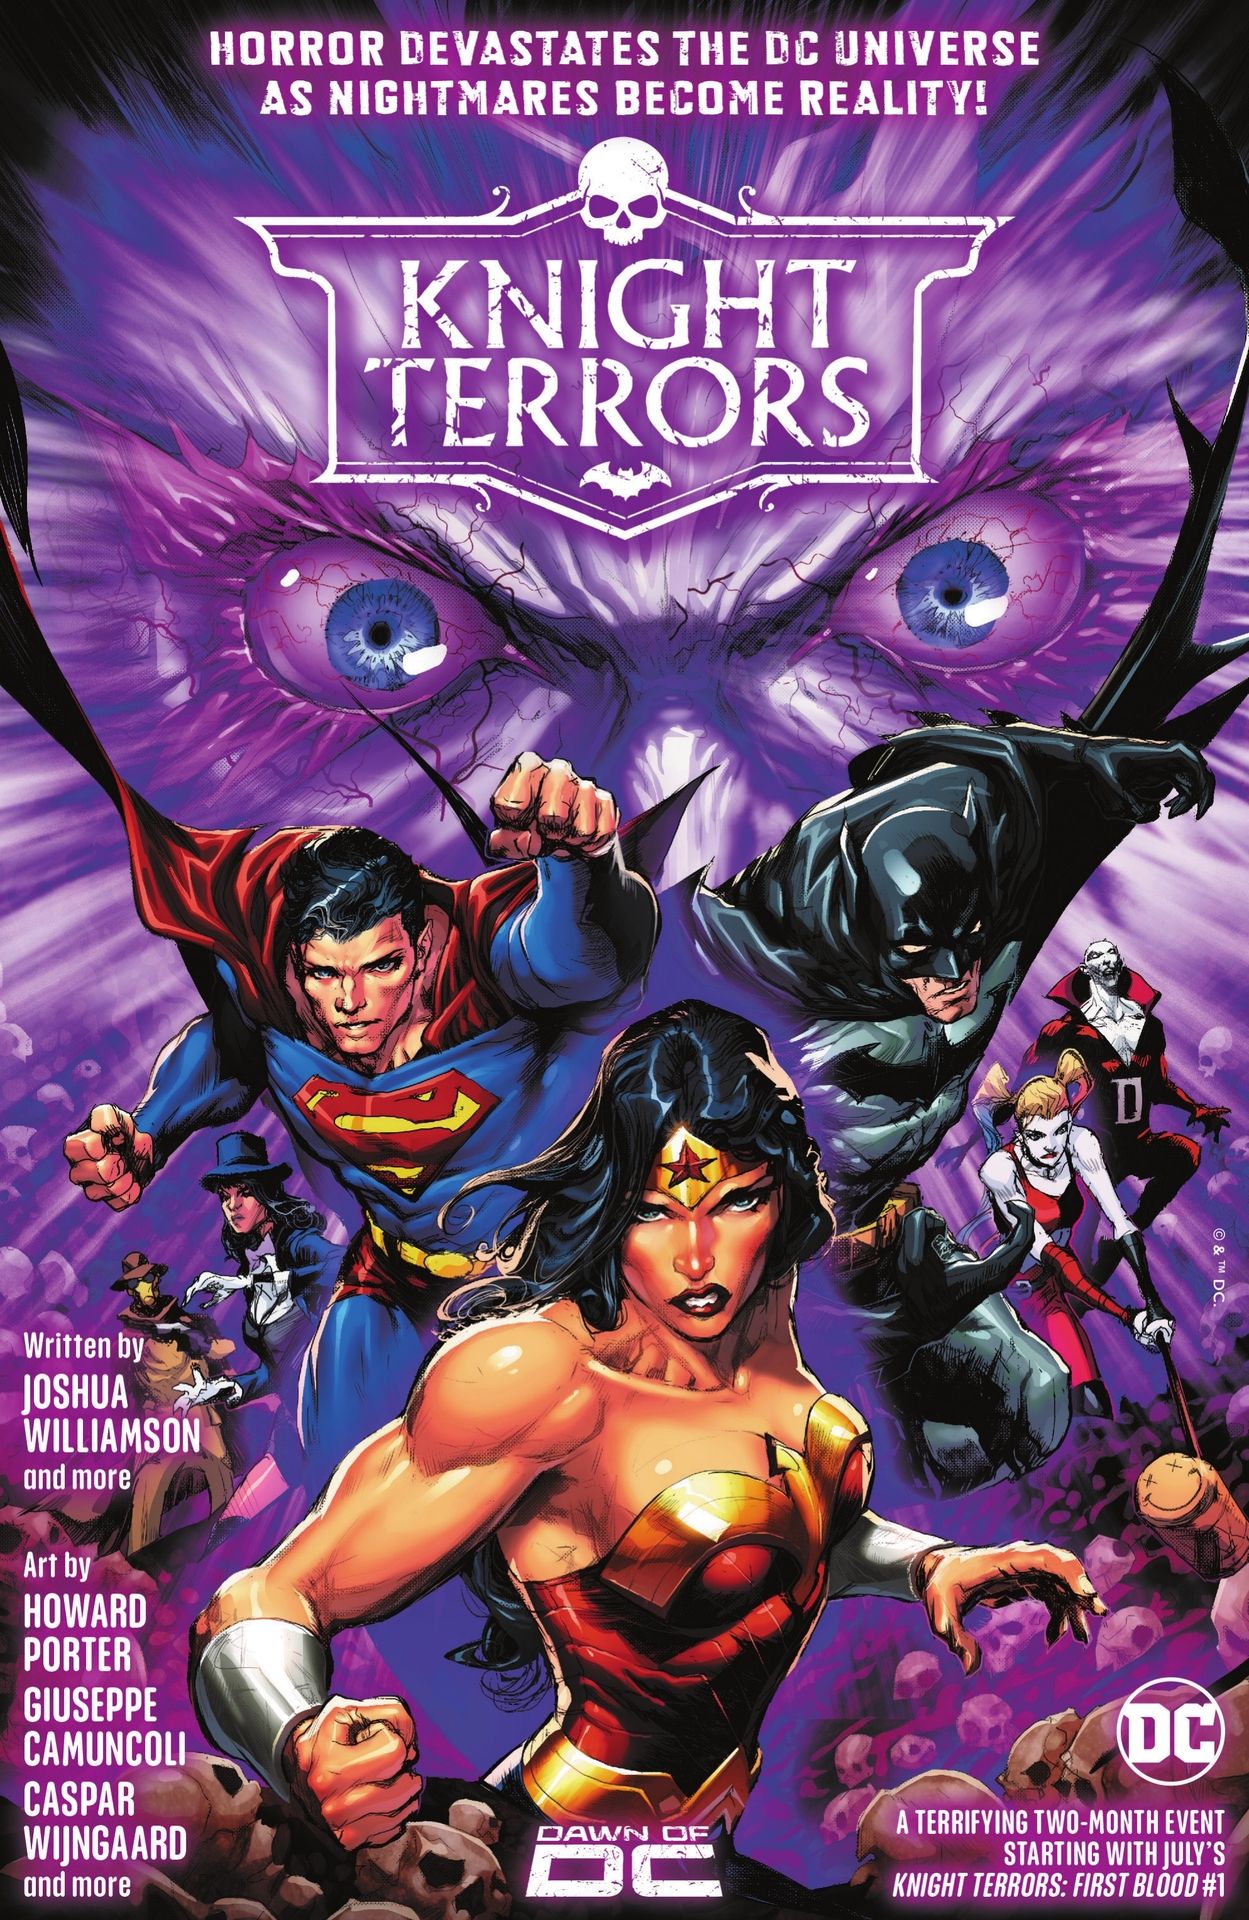 Justice League: The Brave and The Bold Chapter 1 by